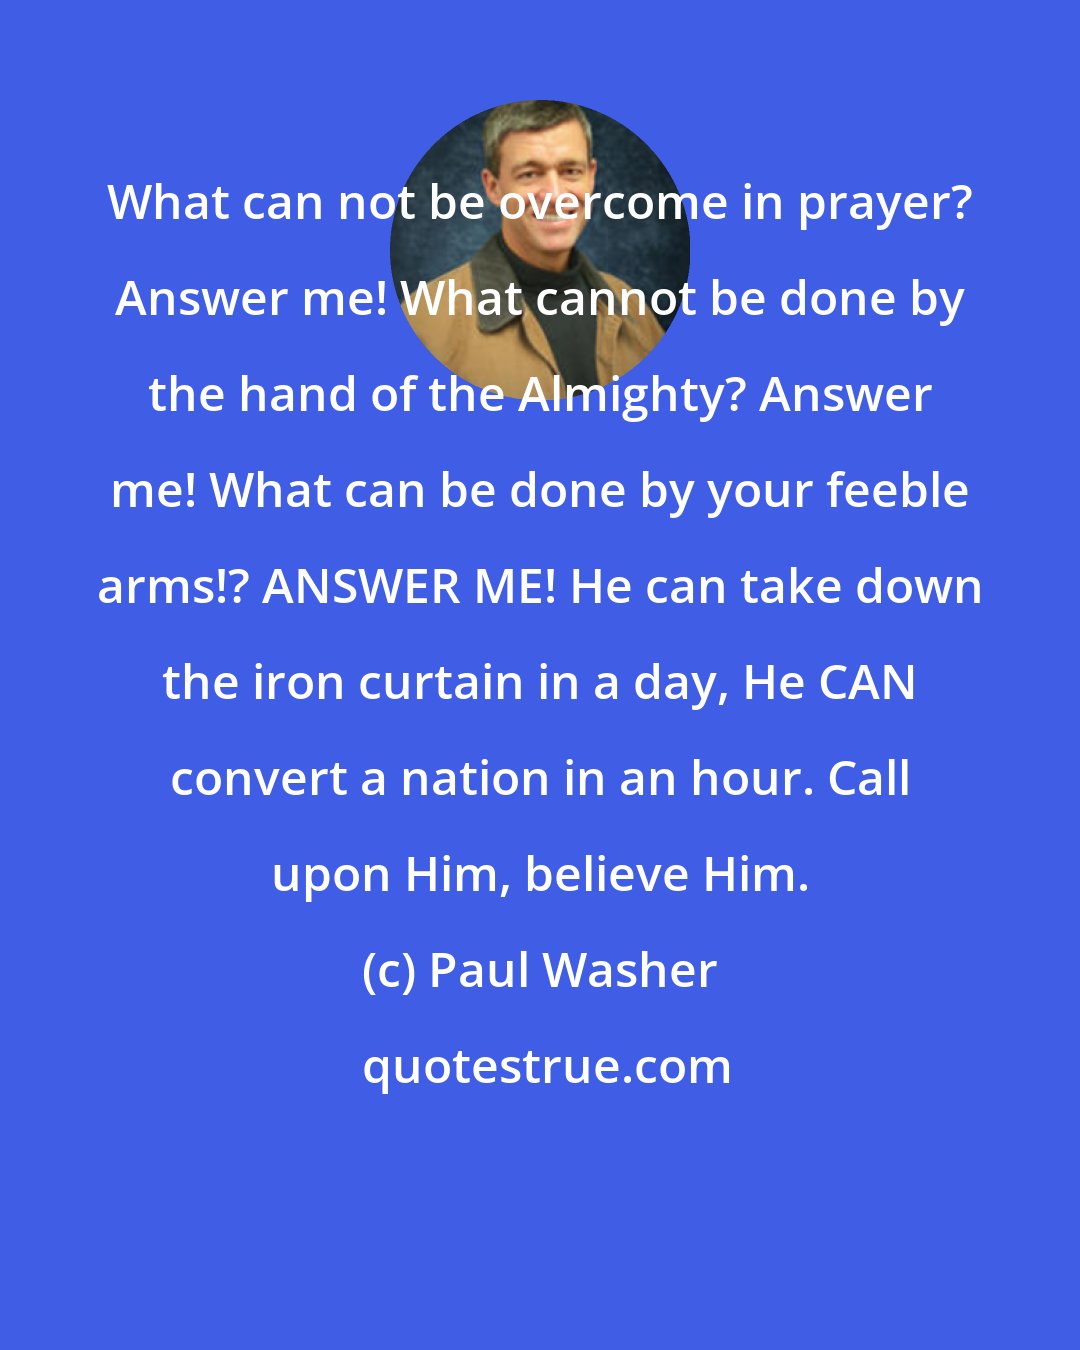 Paul Washer: What can not be overcome in prayer? Answer me! What cannot be done by the hand of the Almighty? Answer me! What can be done by your feeble arms!? ANSWER ME! He can take down the iron curtain in a day, He CAN convert a nation in an hour. Call upon Him, believe Him.